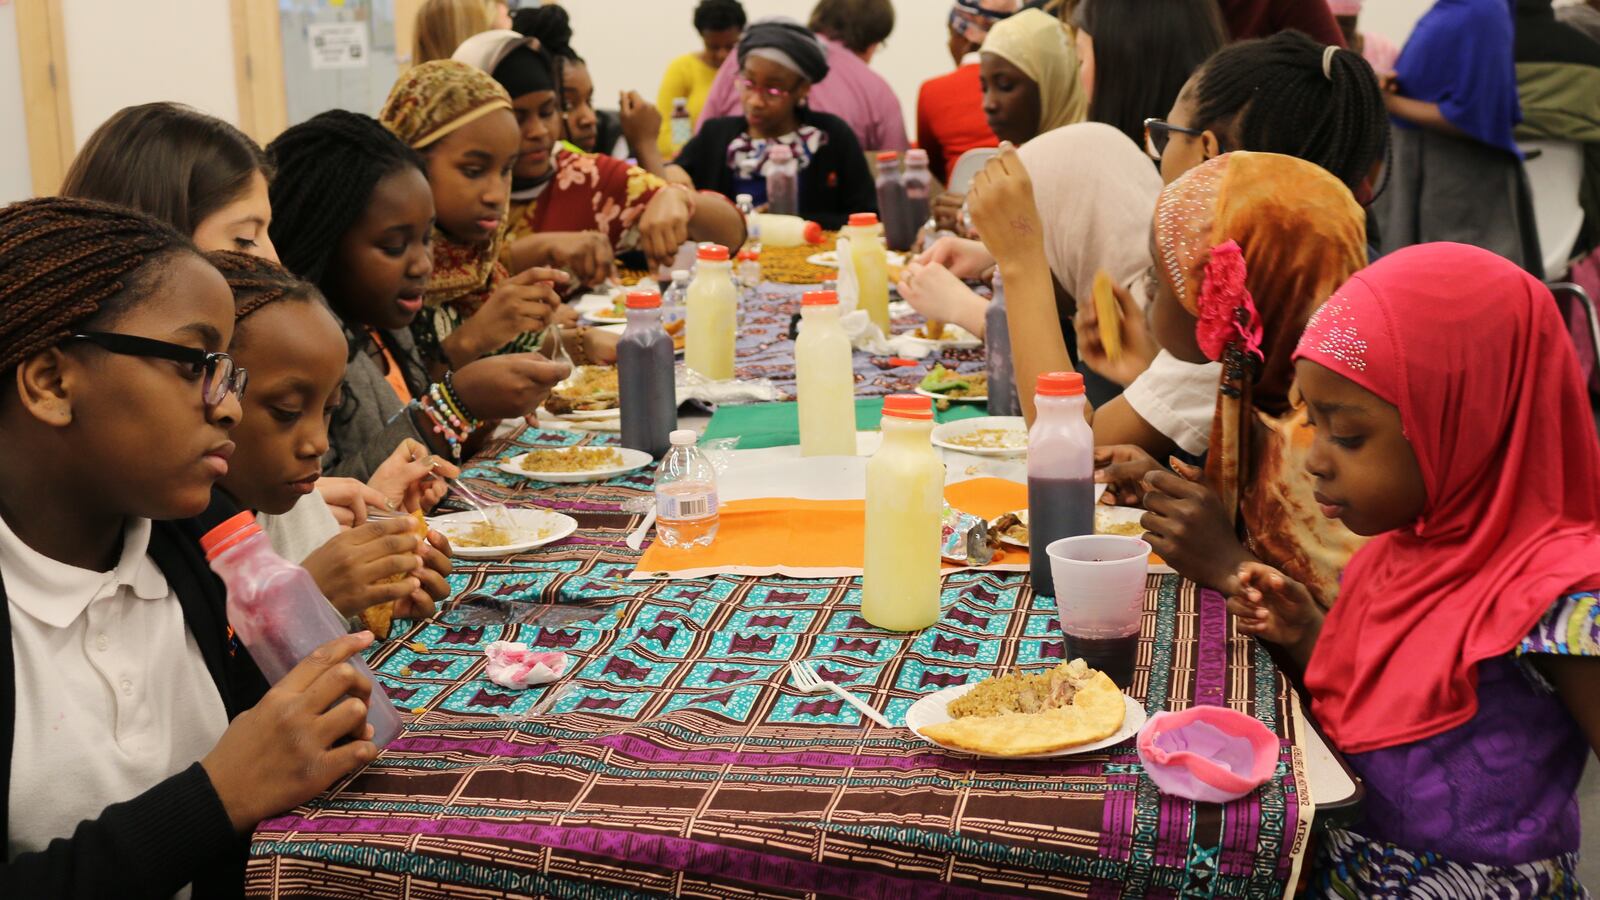 Children's Aid College Prep Charter School hosts regular events for its African families, one way the Bronx school tries to make sure immigrants are welcomed and served well.